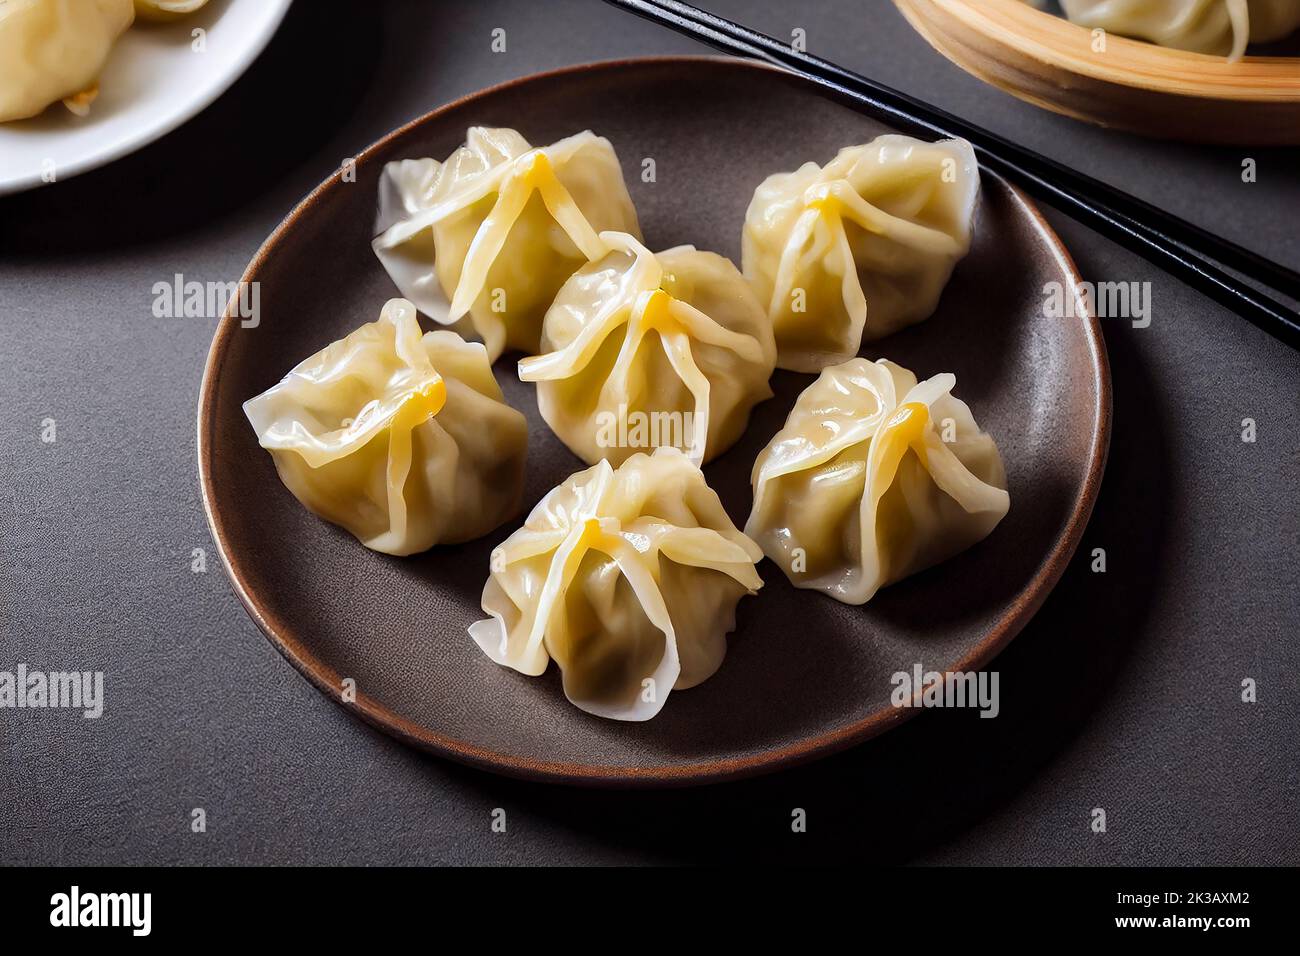 Beautifully plated Chinese dumplings on a dark table, food photography and illustration Stock Photo